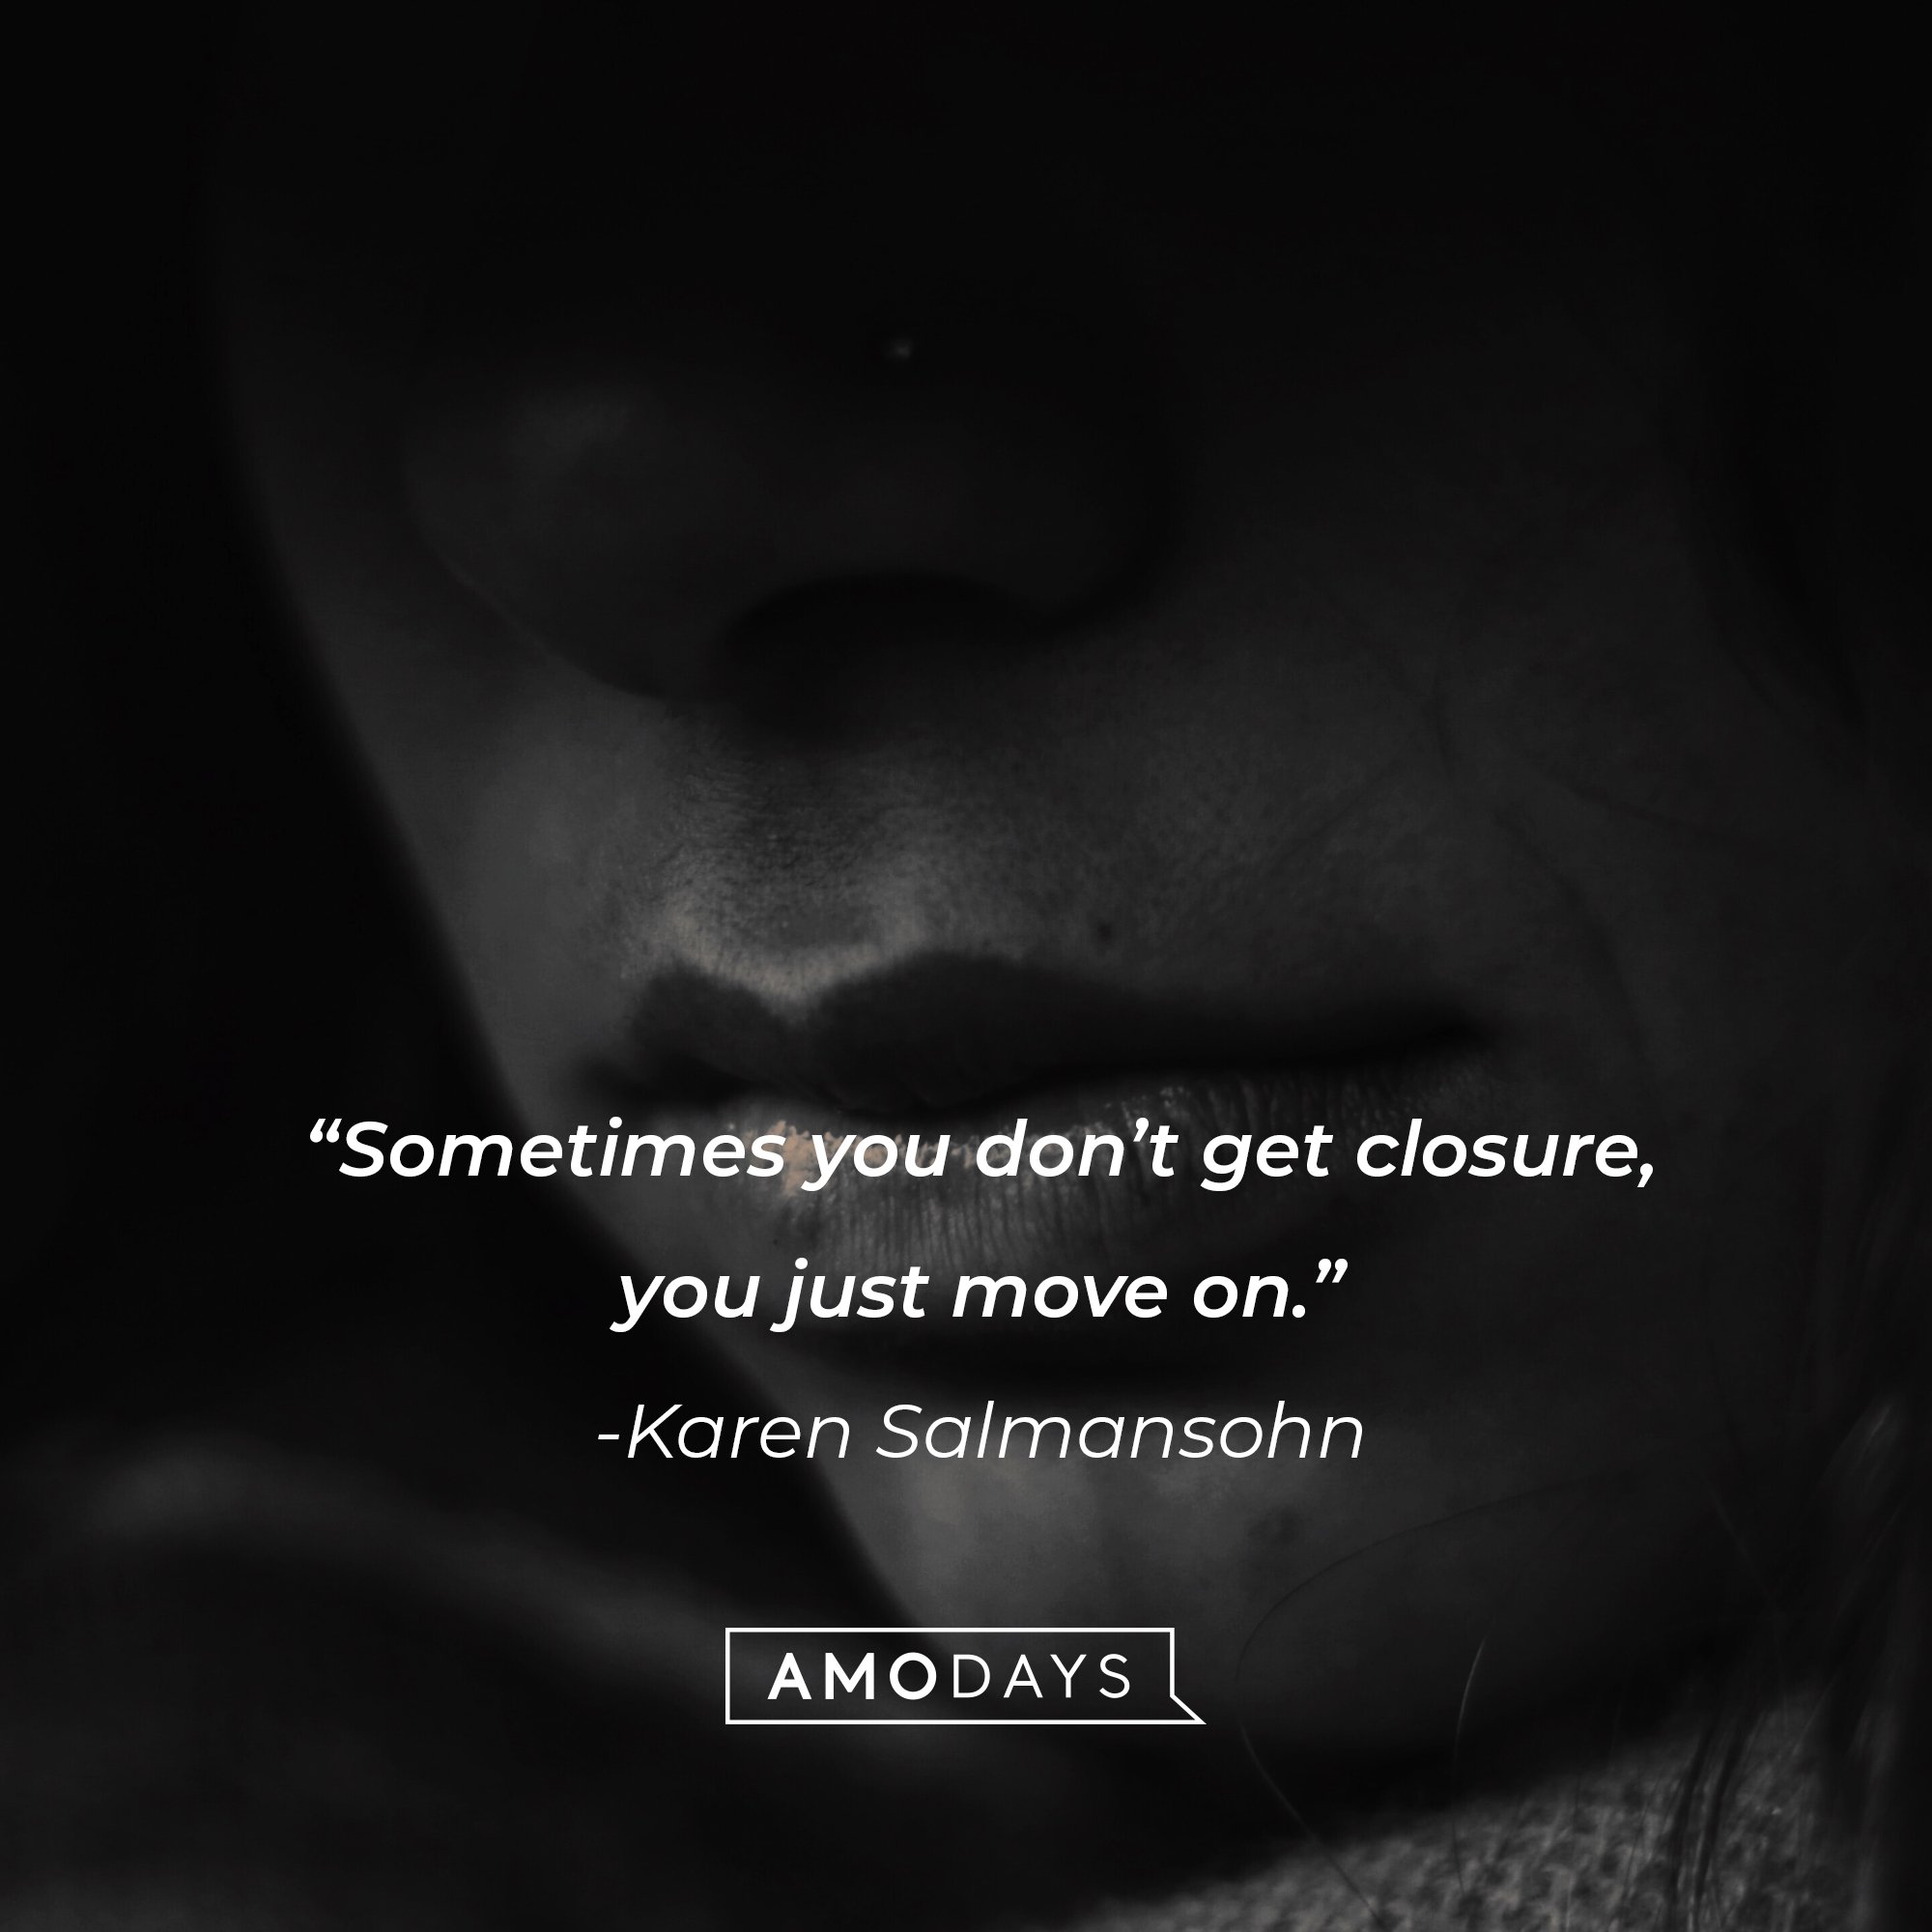 Karen Salmansohn's quote: "Sometimes you don't get closure, you just move on."  | Image: AmoDays